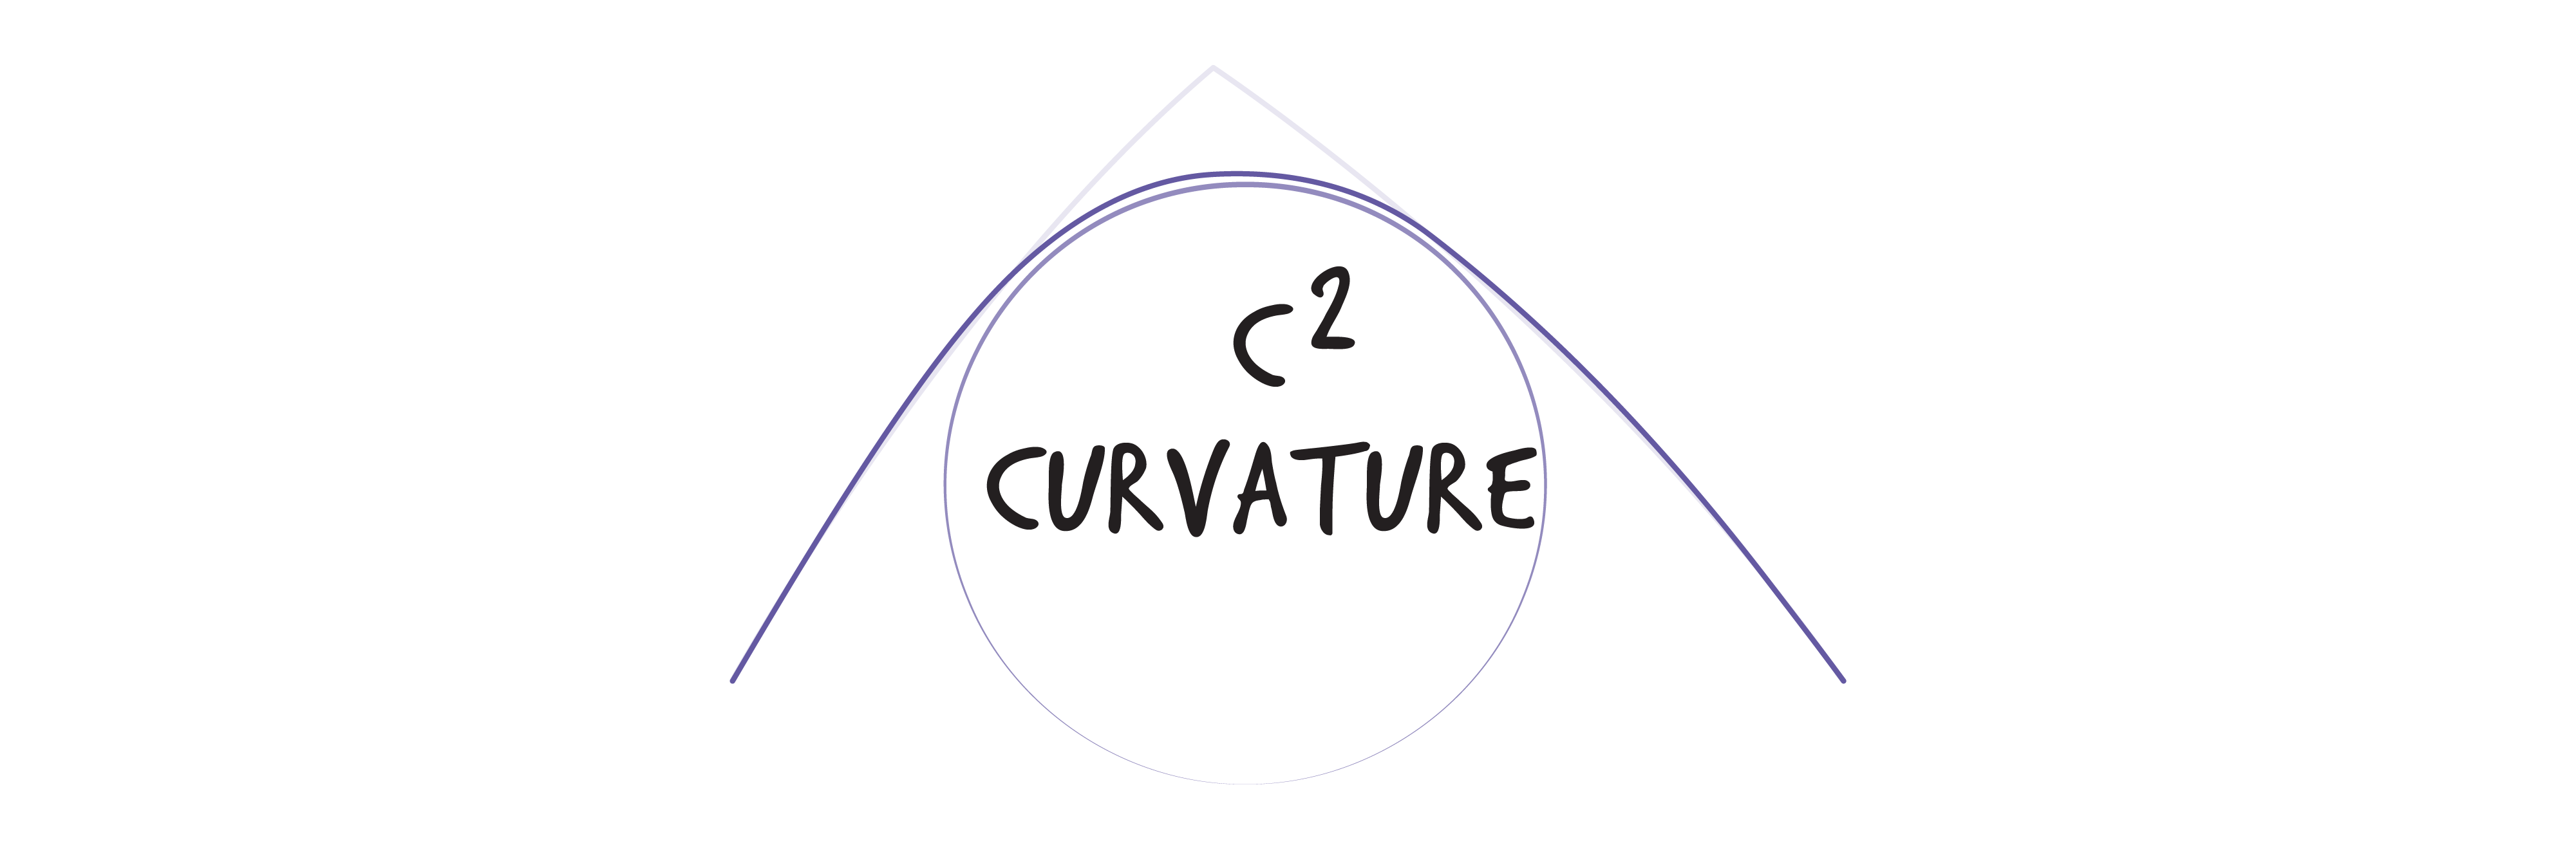 This illustration shows C2 curvature, as shown in the text of the image. The horizontal surface flows into the vertical surface.